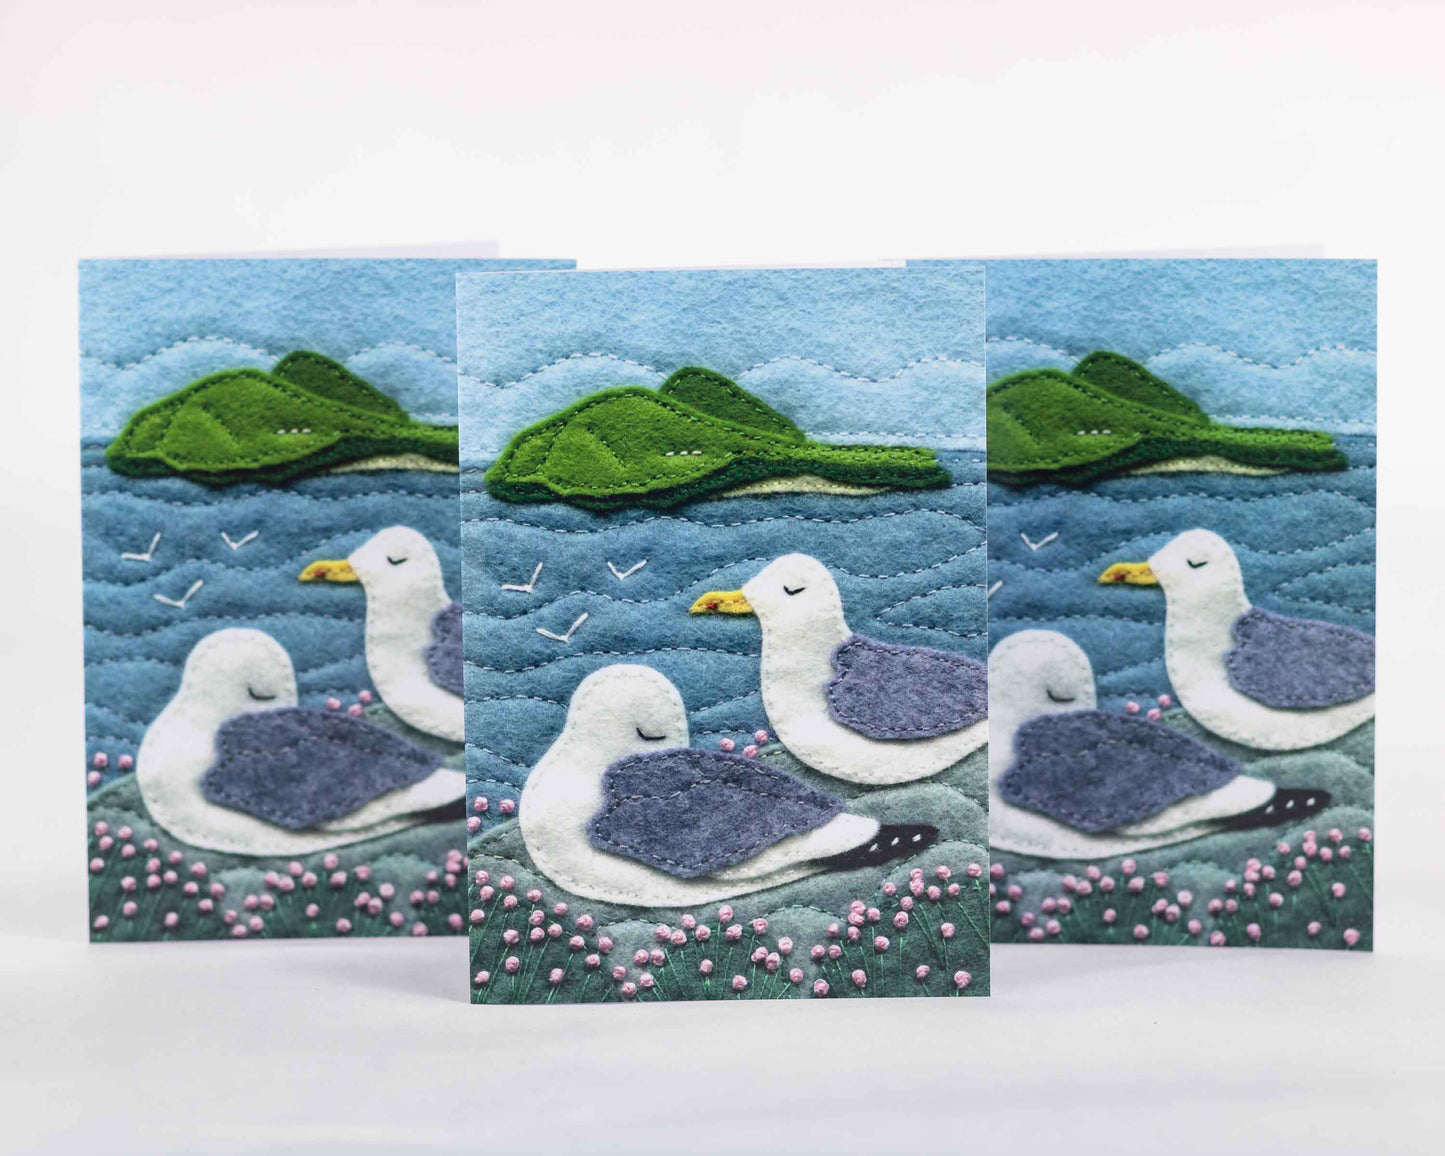 Seagull Greeting Cards